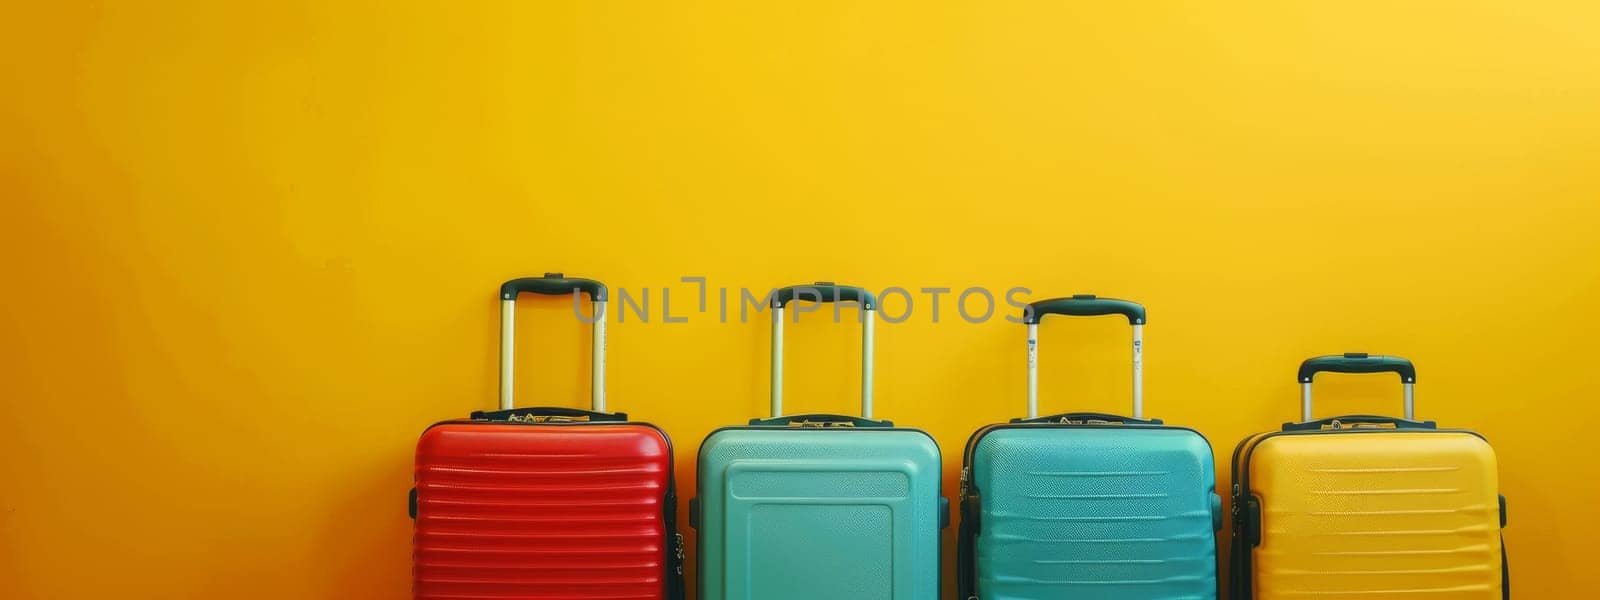 Colorful luggage isolated on yellow background, traveling concept